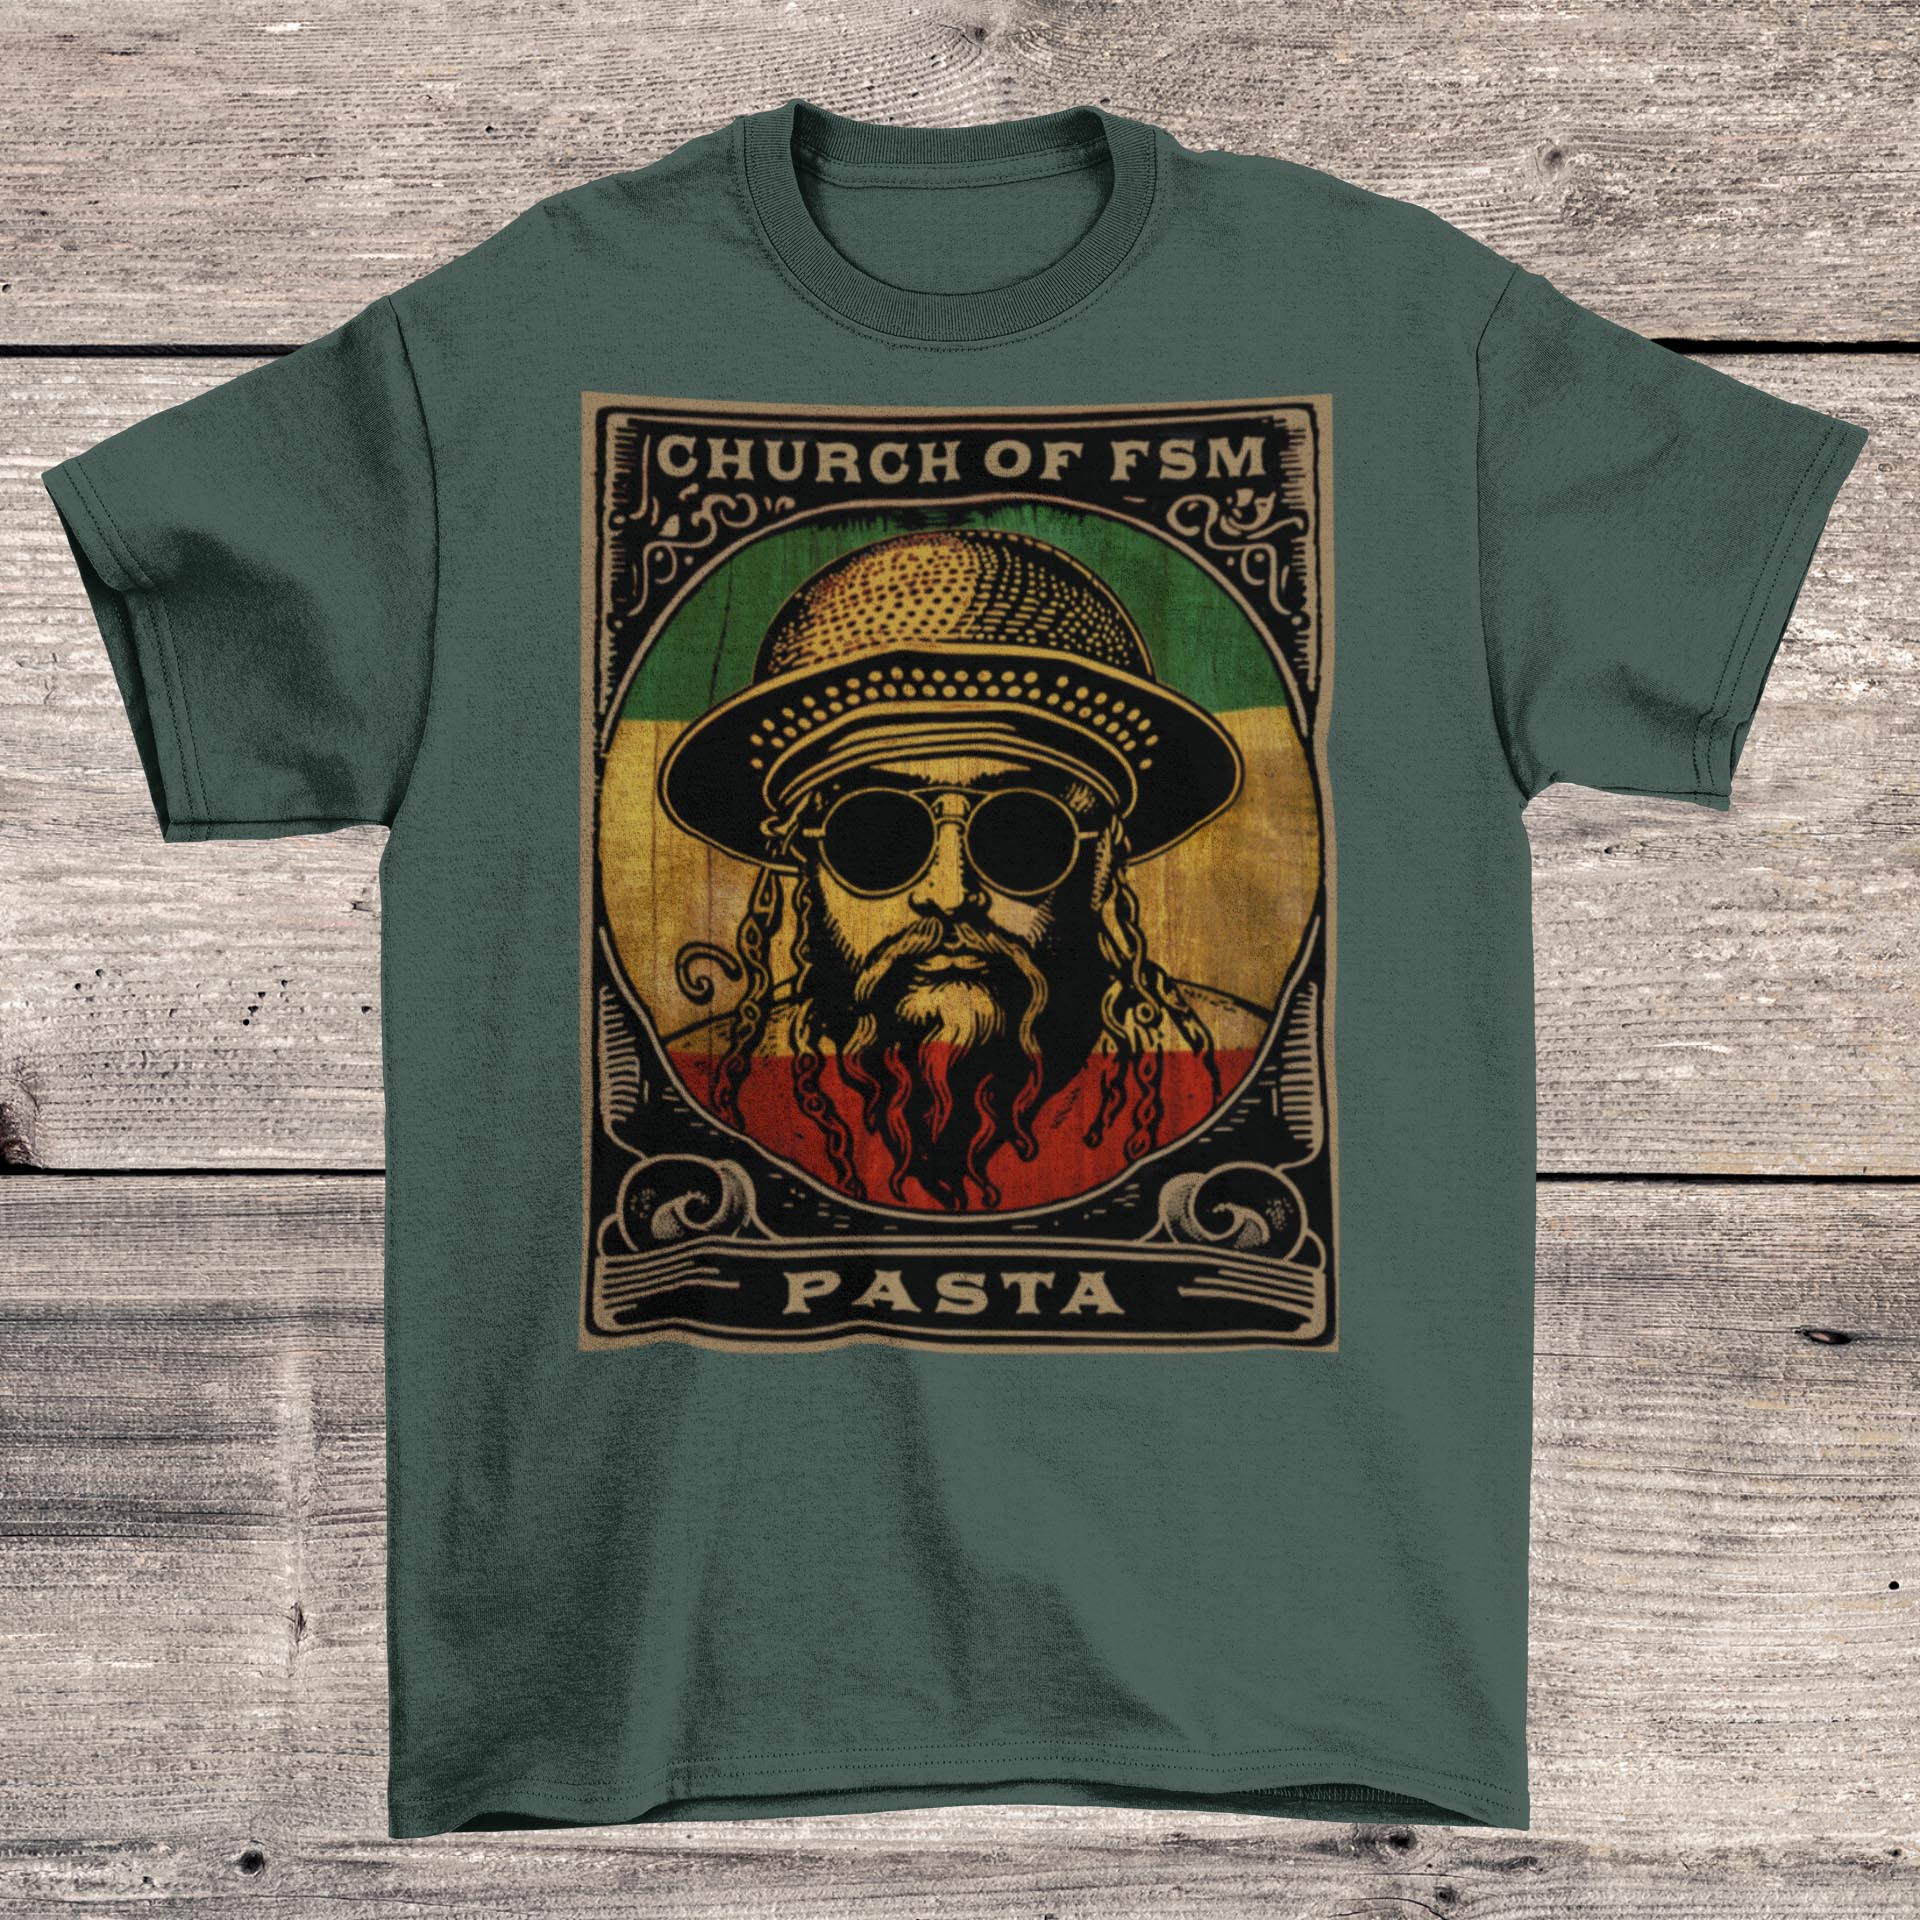 T-Shirts XS / Heather Forest Pastafarianism & The Flying Spaghetti Monster (FSM) | Reggae and Atheist Inspired Pasta Graphic Art T-Shirt